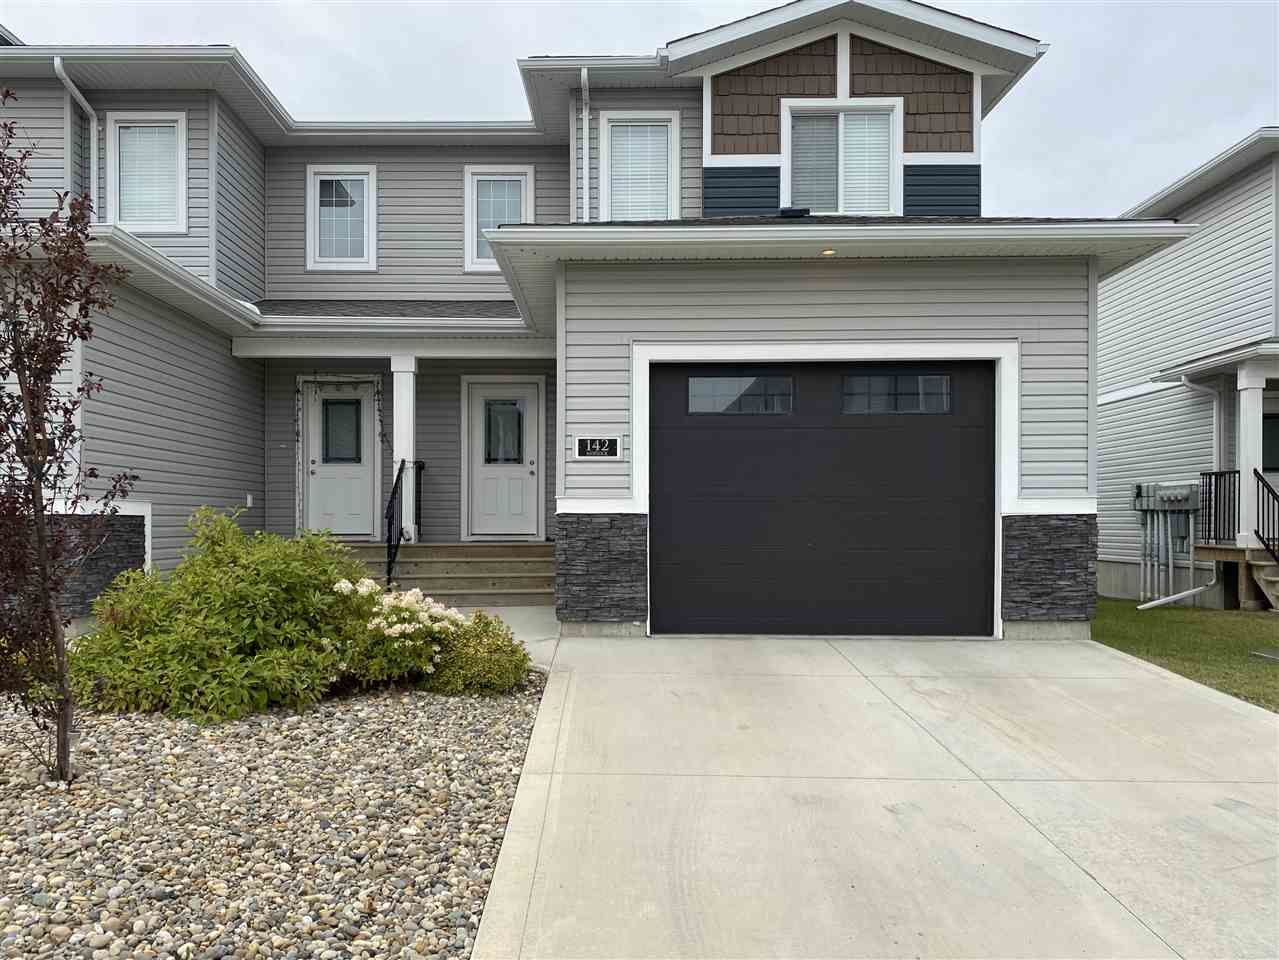 I have sold a property at 142 10104 114A AVE in Fort St. John
